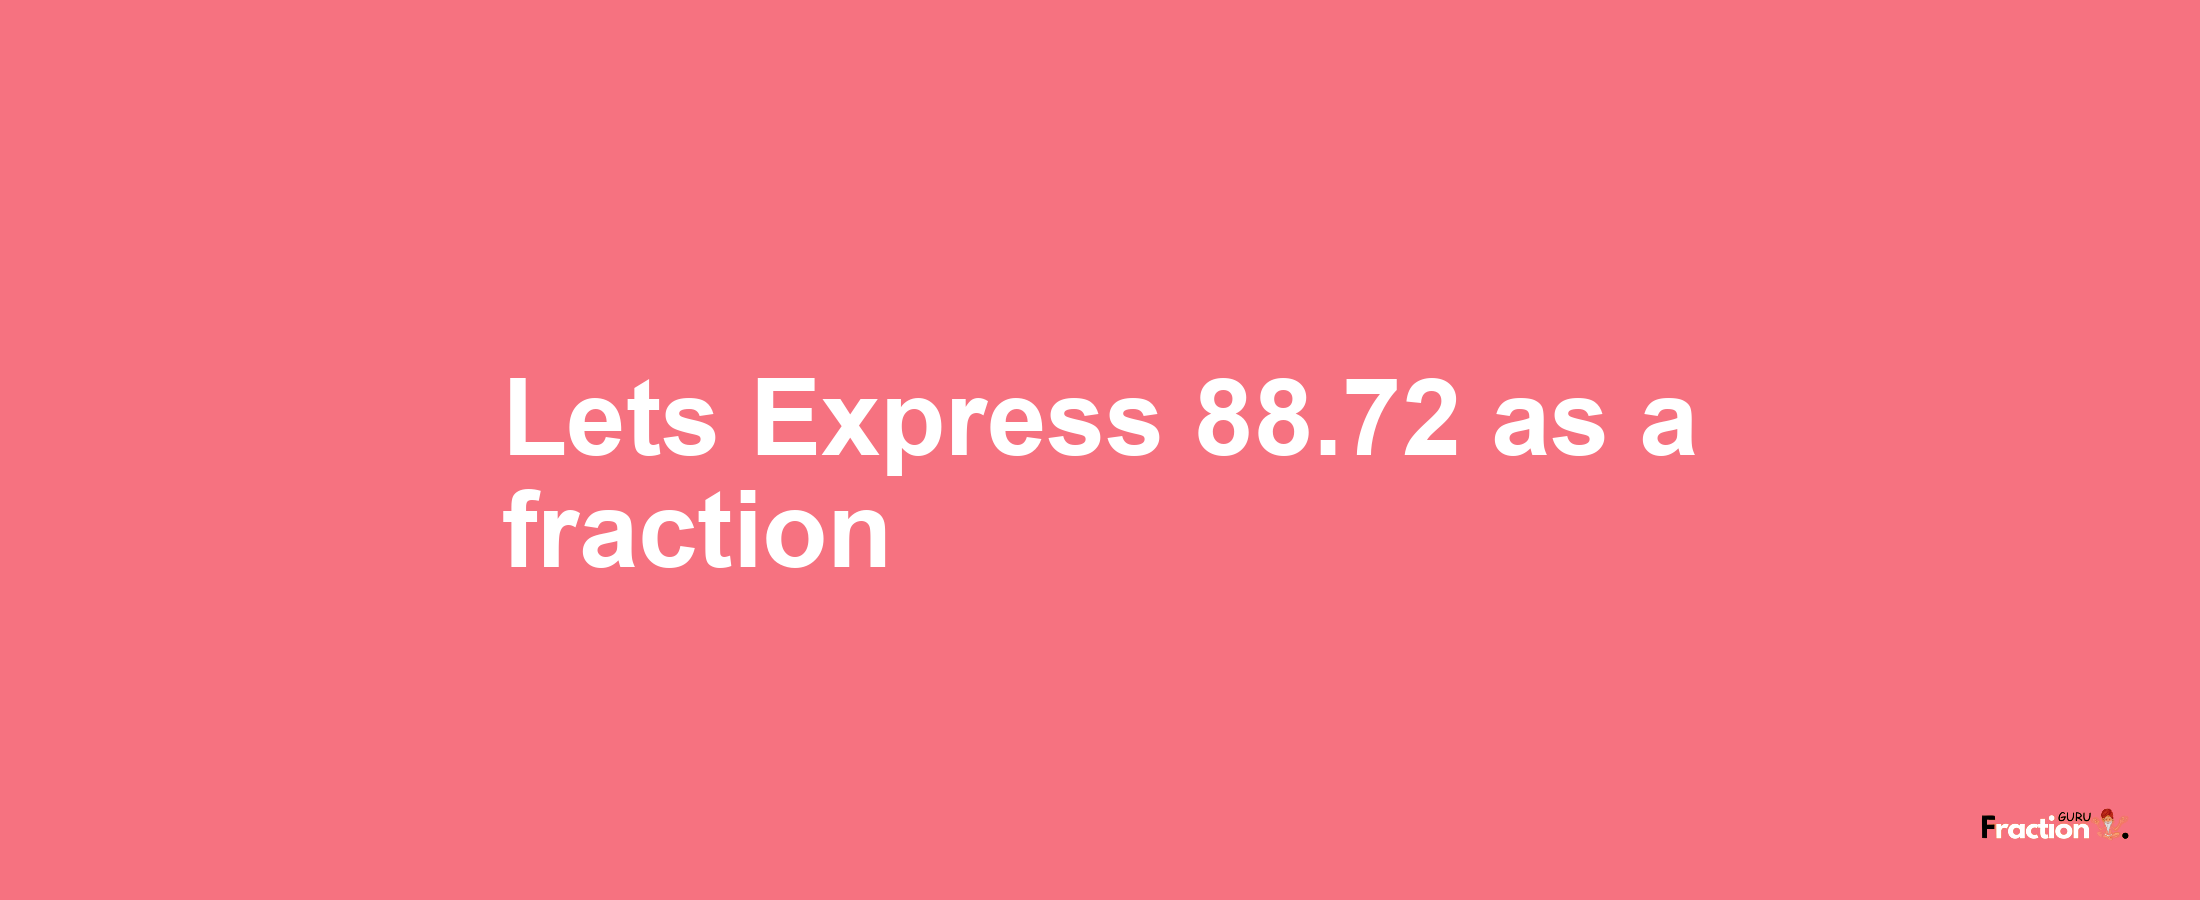 Lets Express 88.72 as afraction